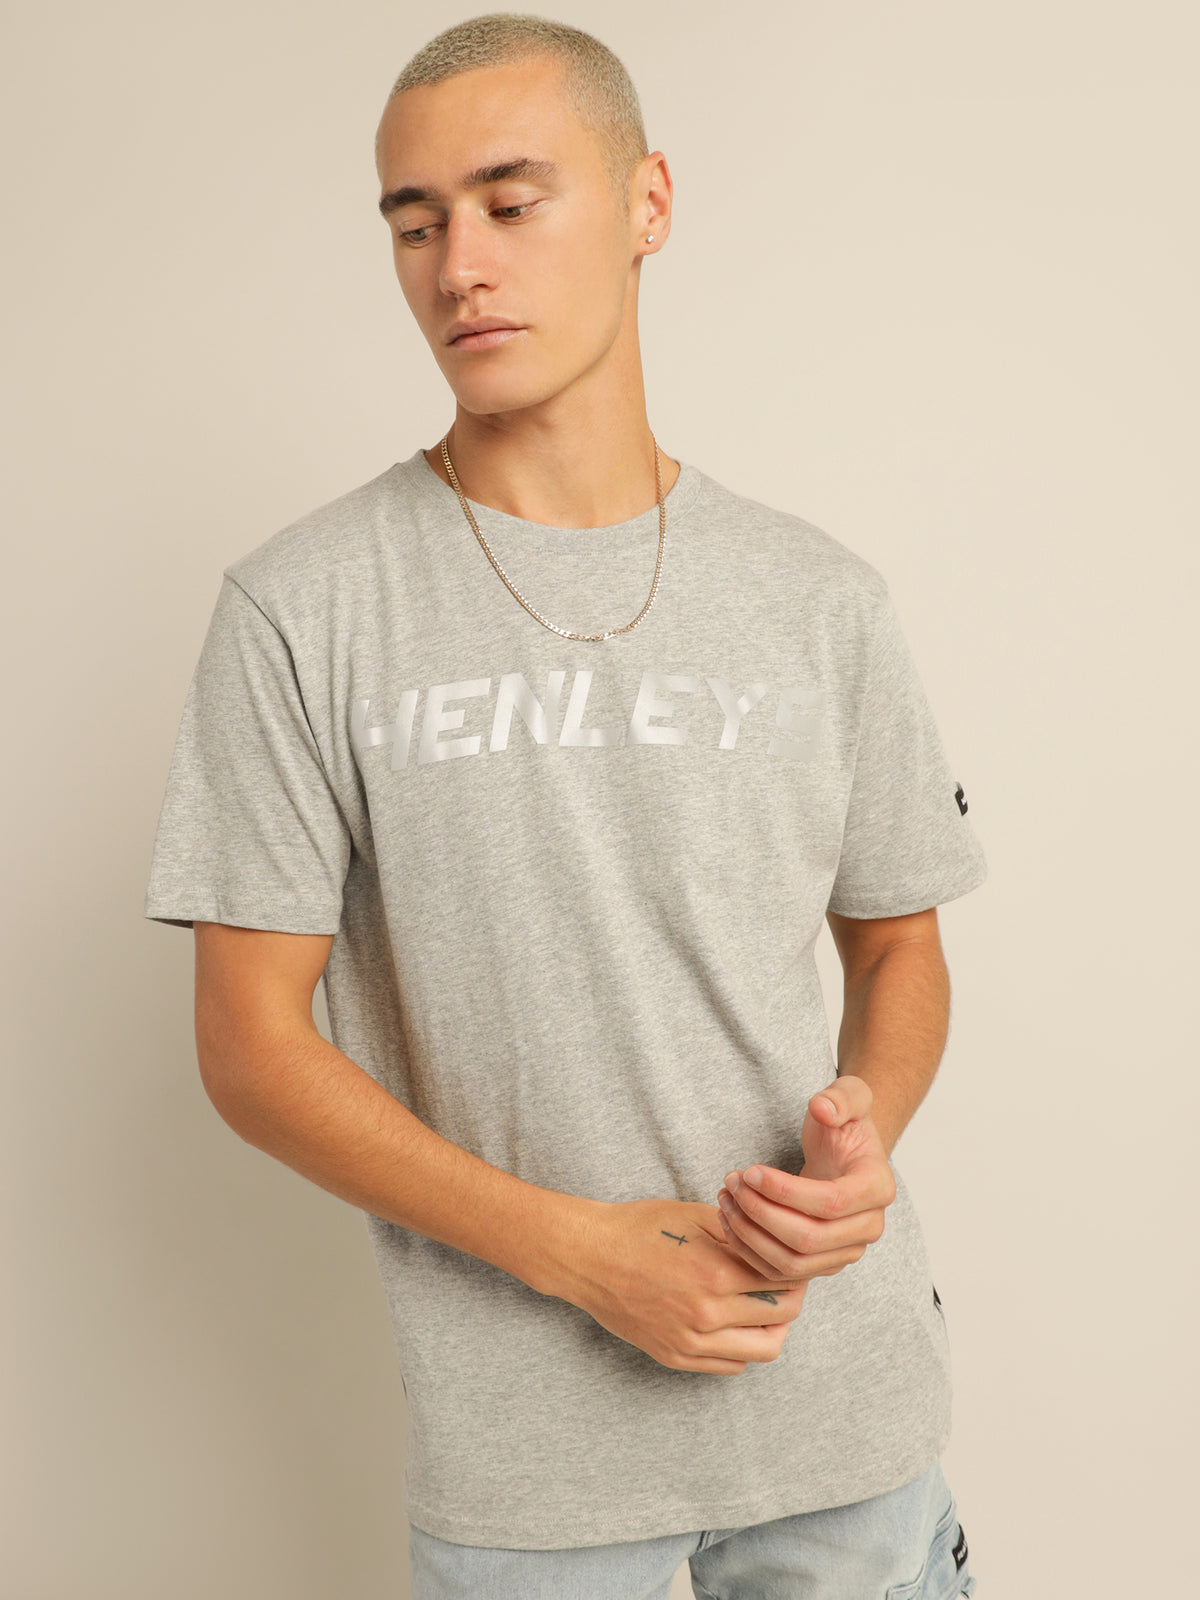 United Reflective T-Shirt in Grey Marle